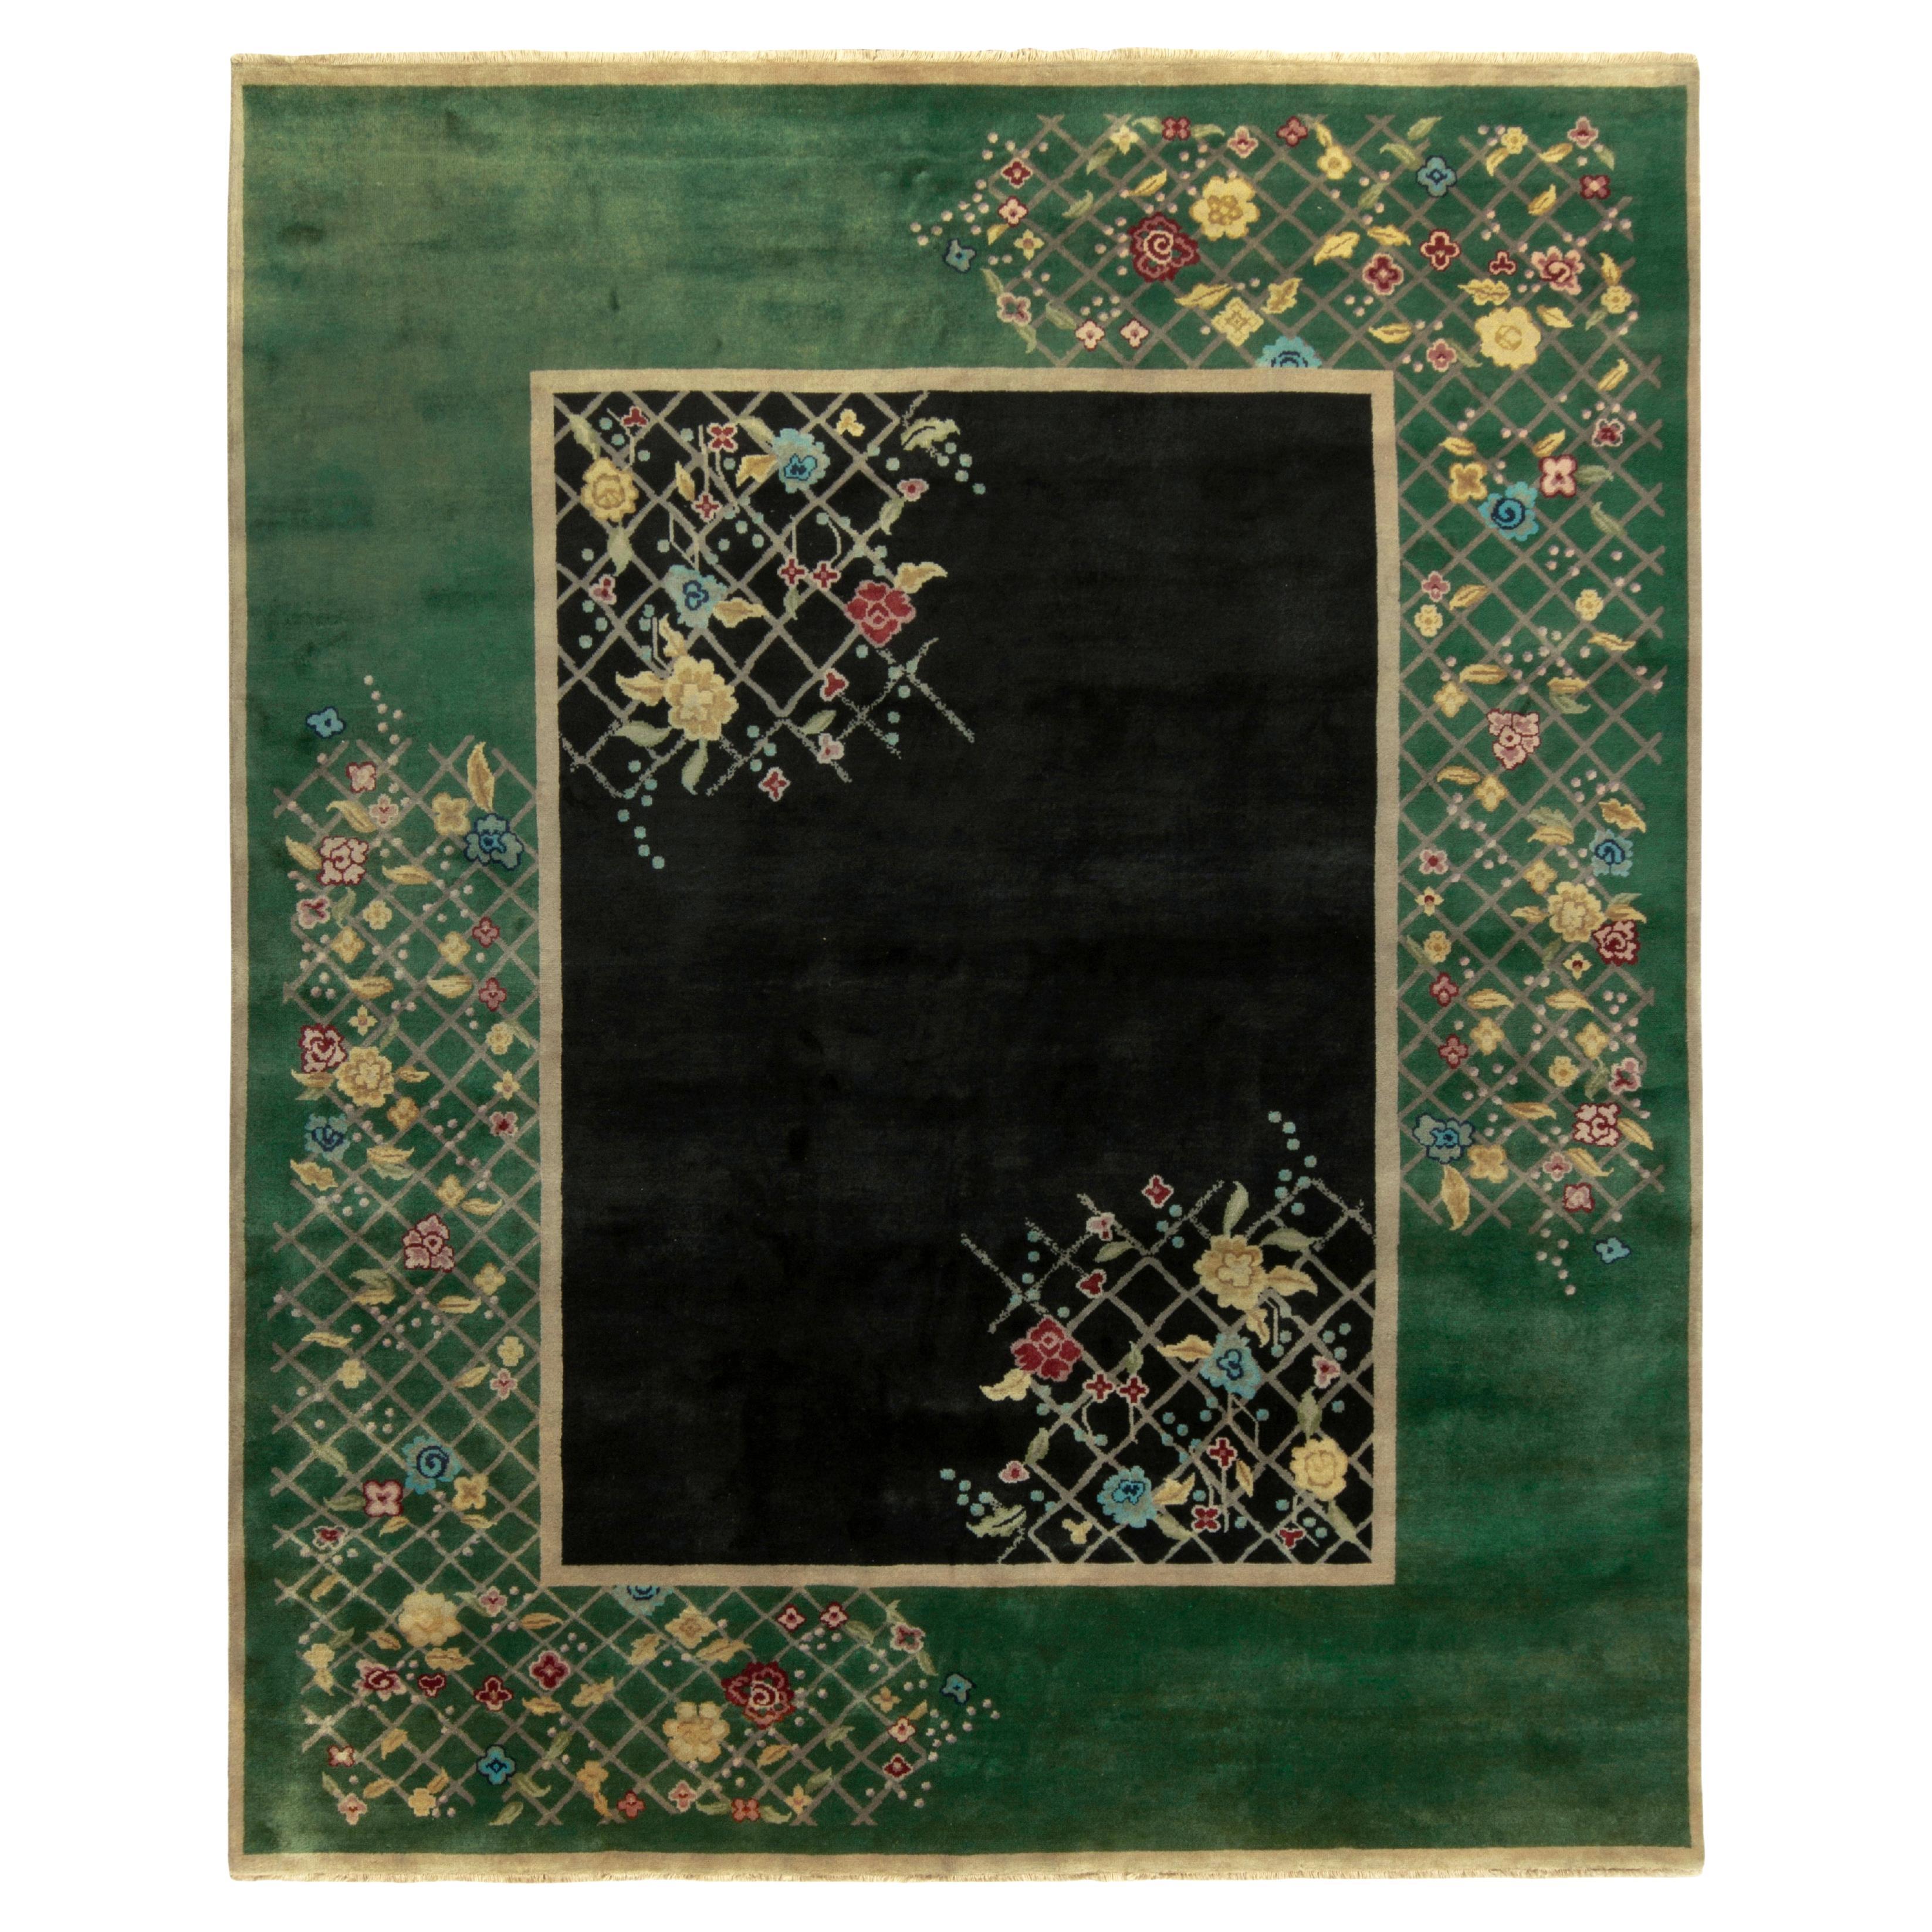 Chinese Deco Style Rug in Teal-Green, Black with Colorful Florals by Rug & Kilim For Sale